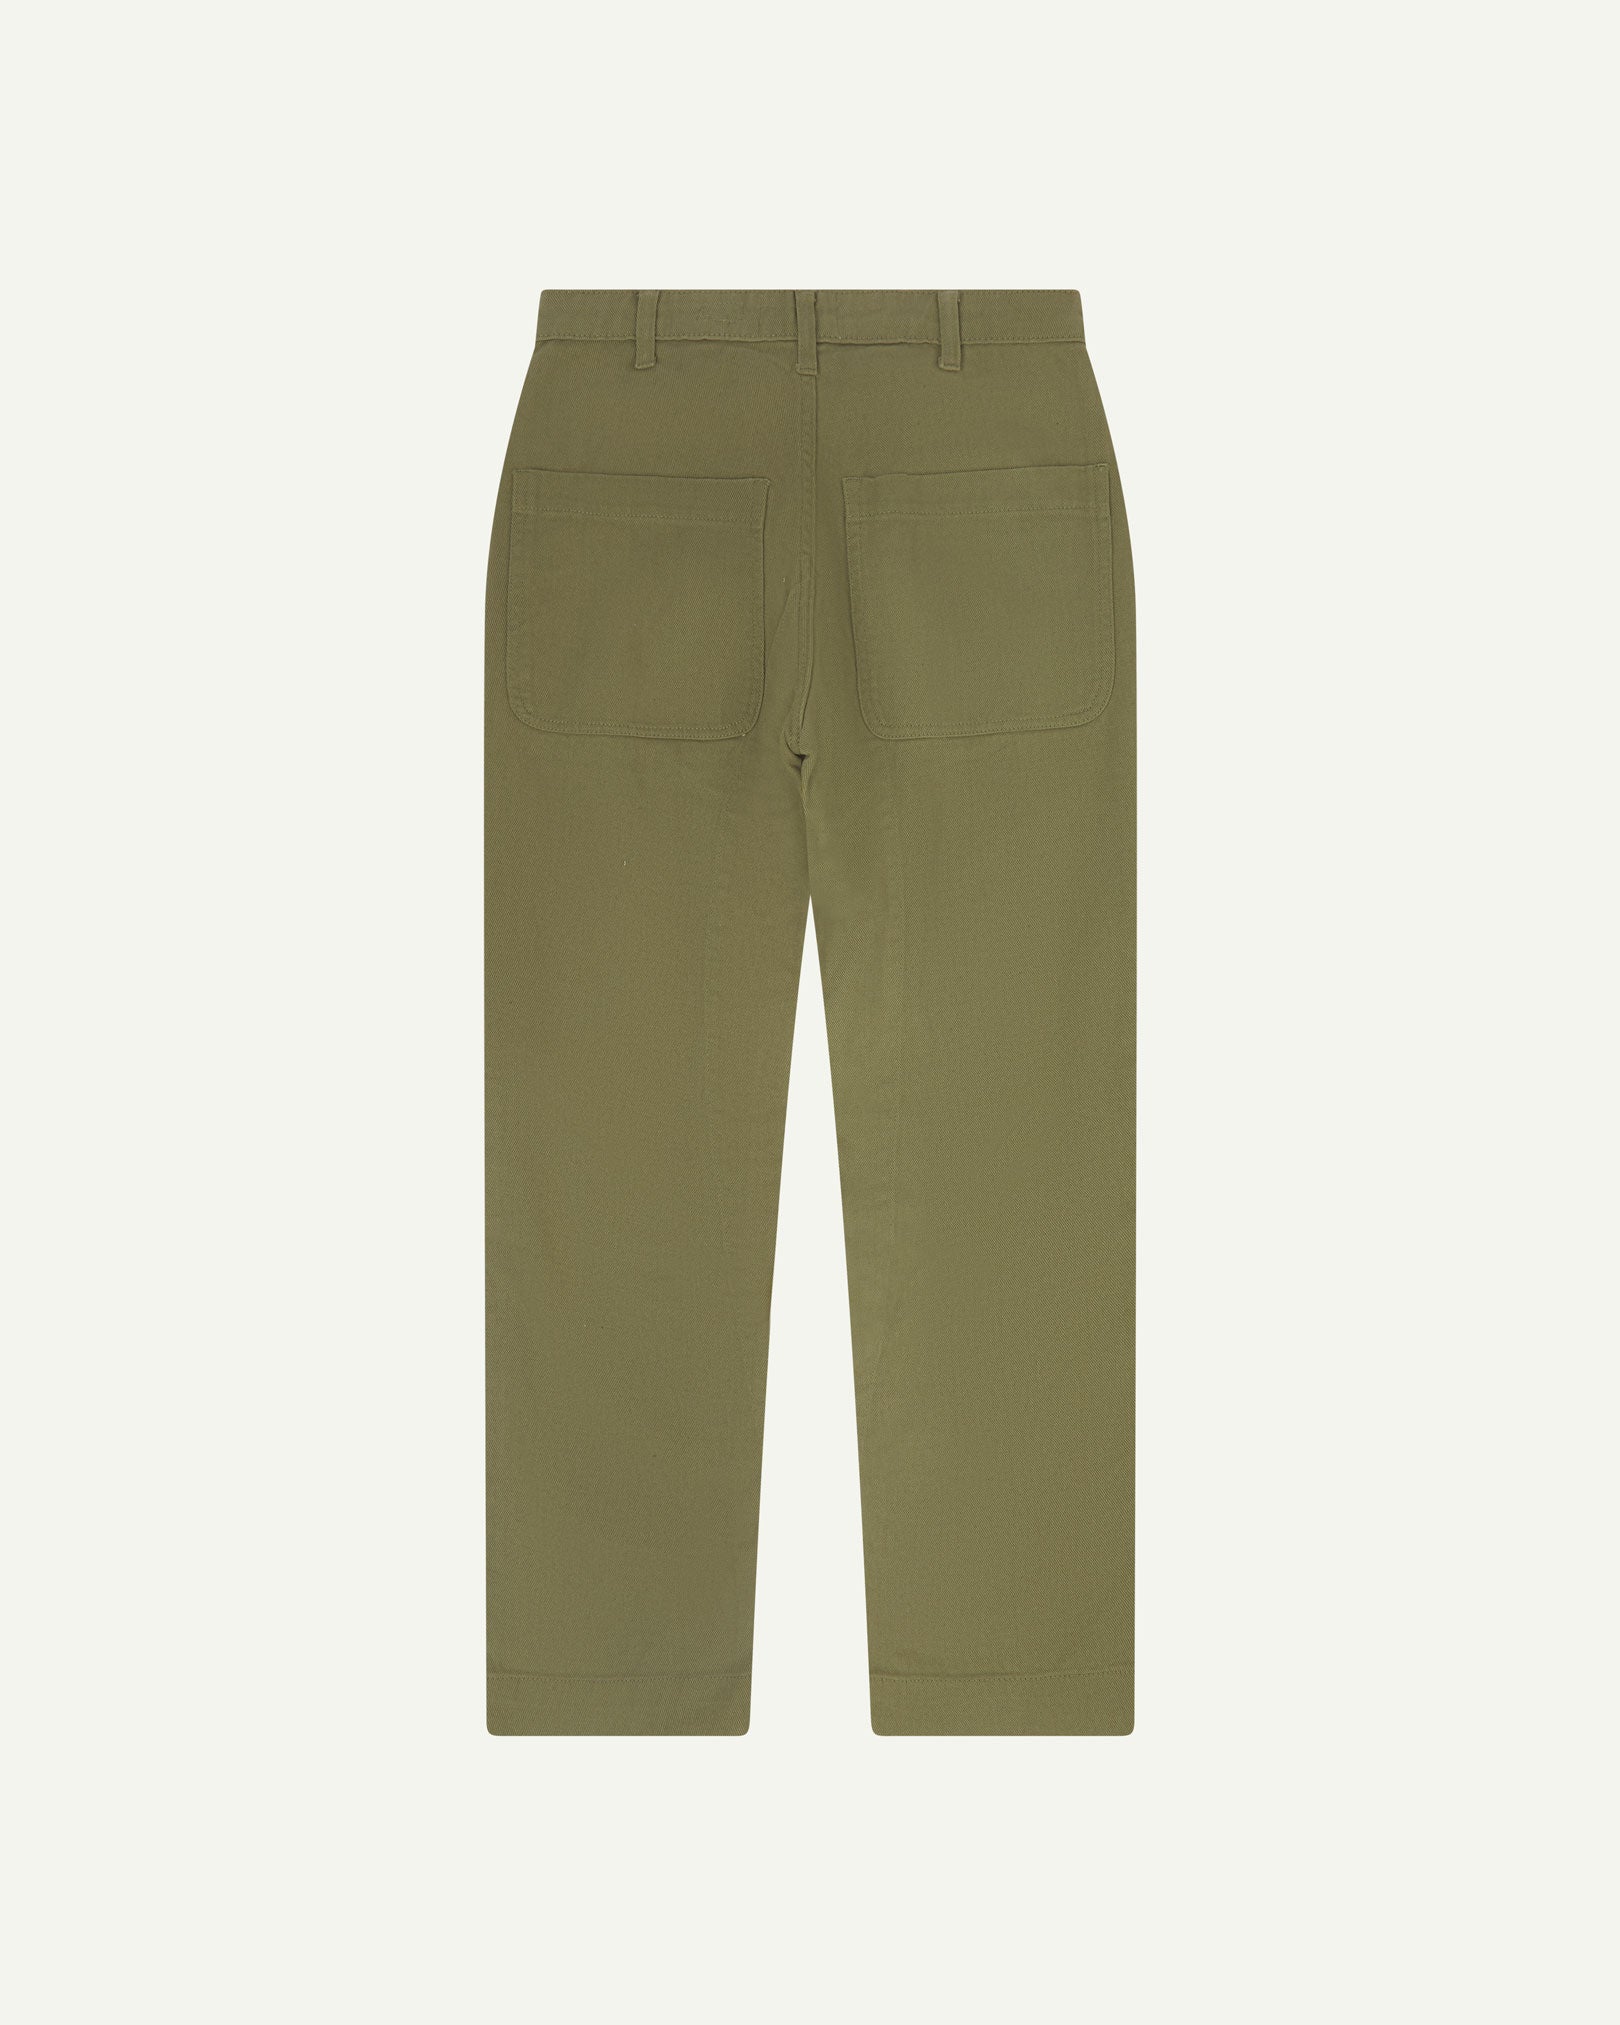 Full length back-view of moss green heavyweight drill 5016 commuter trousers with view of rear pockets and belt loops.